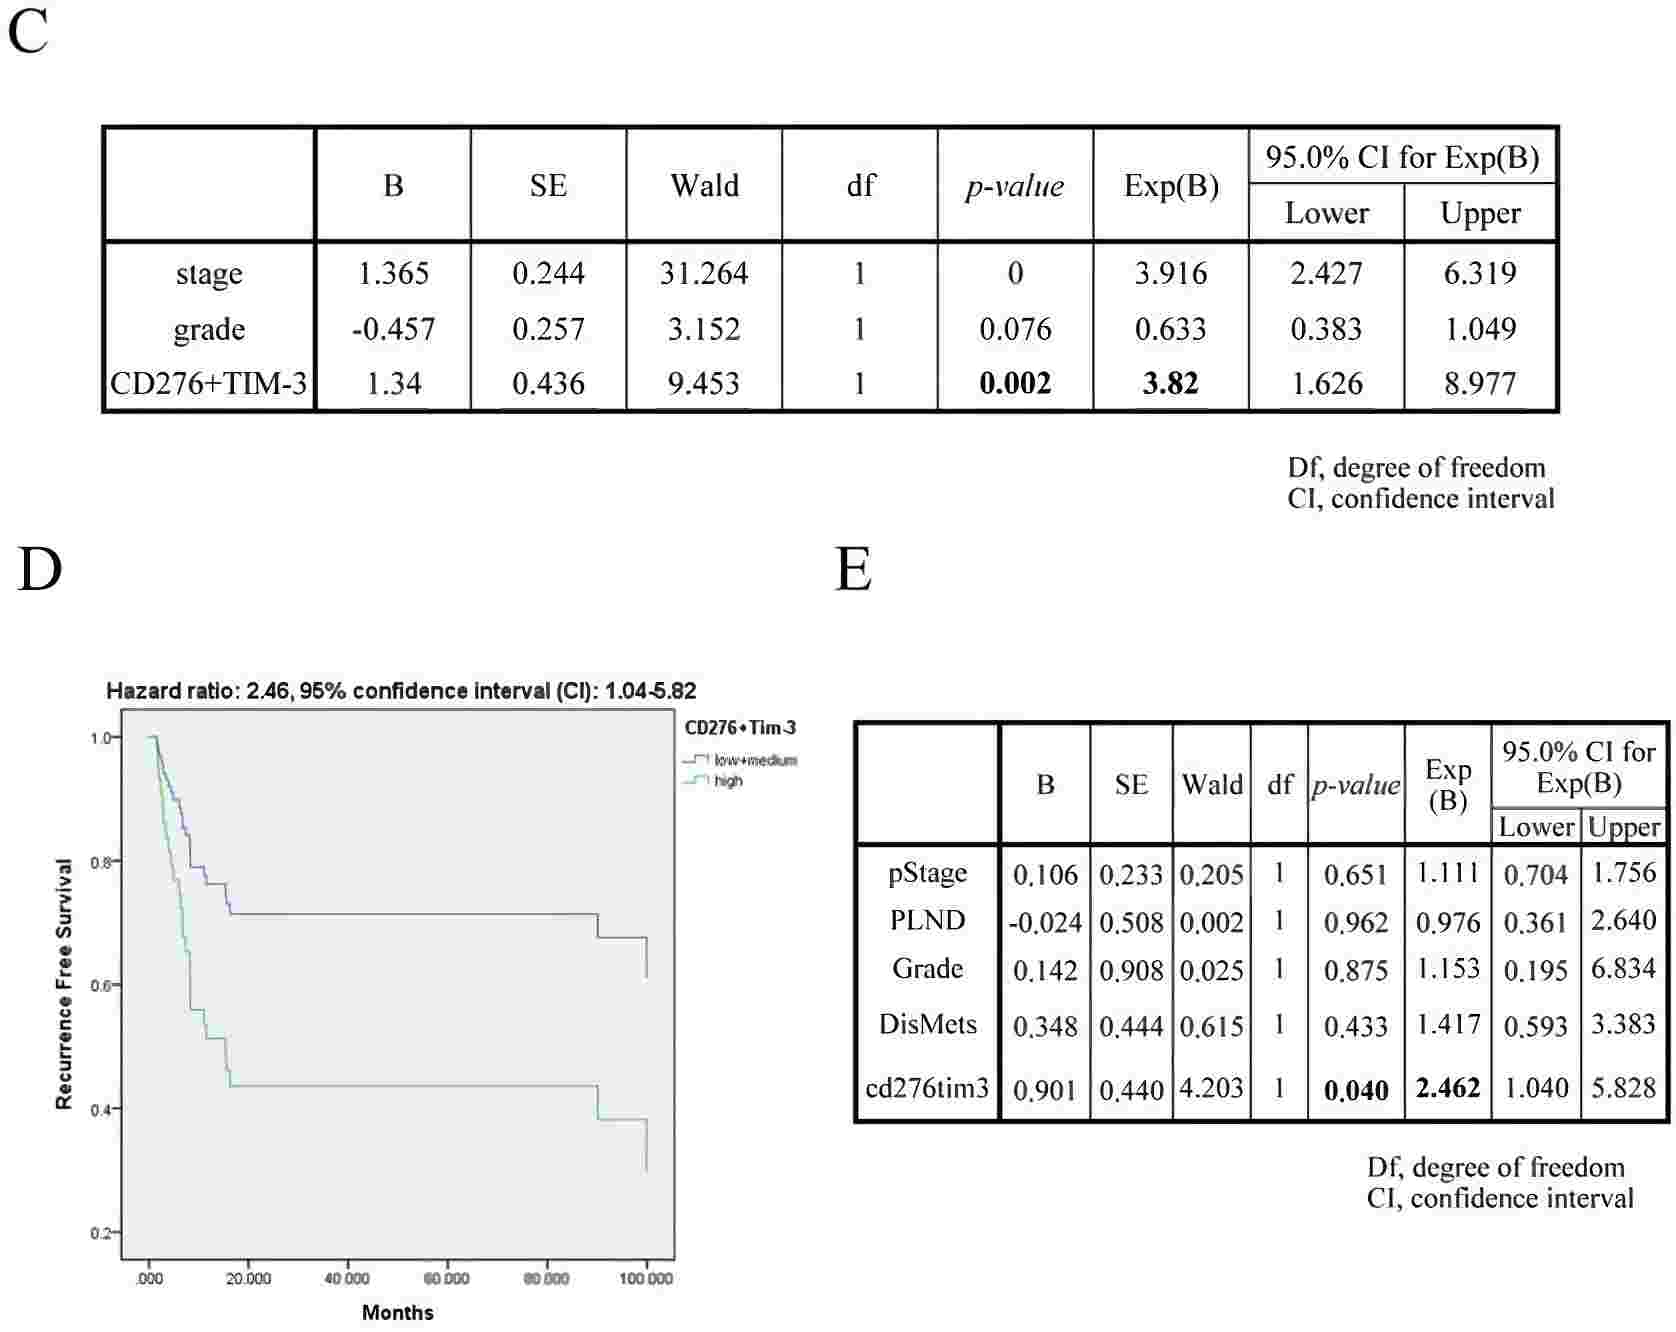 CD276 and TIM-3 in combination was an independently poor prognostic biomarker of UC. (Tsai, et al., 2021)